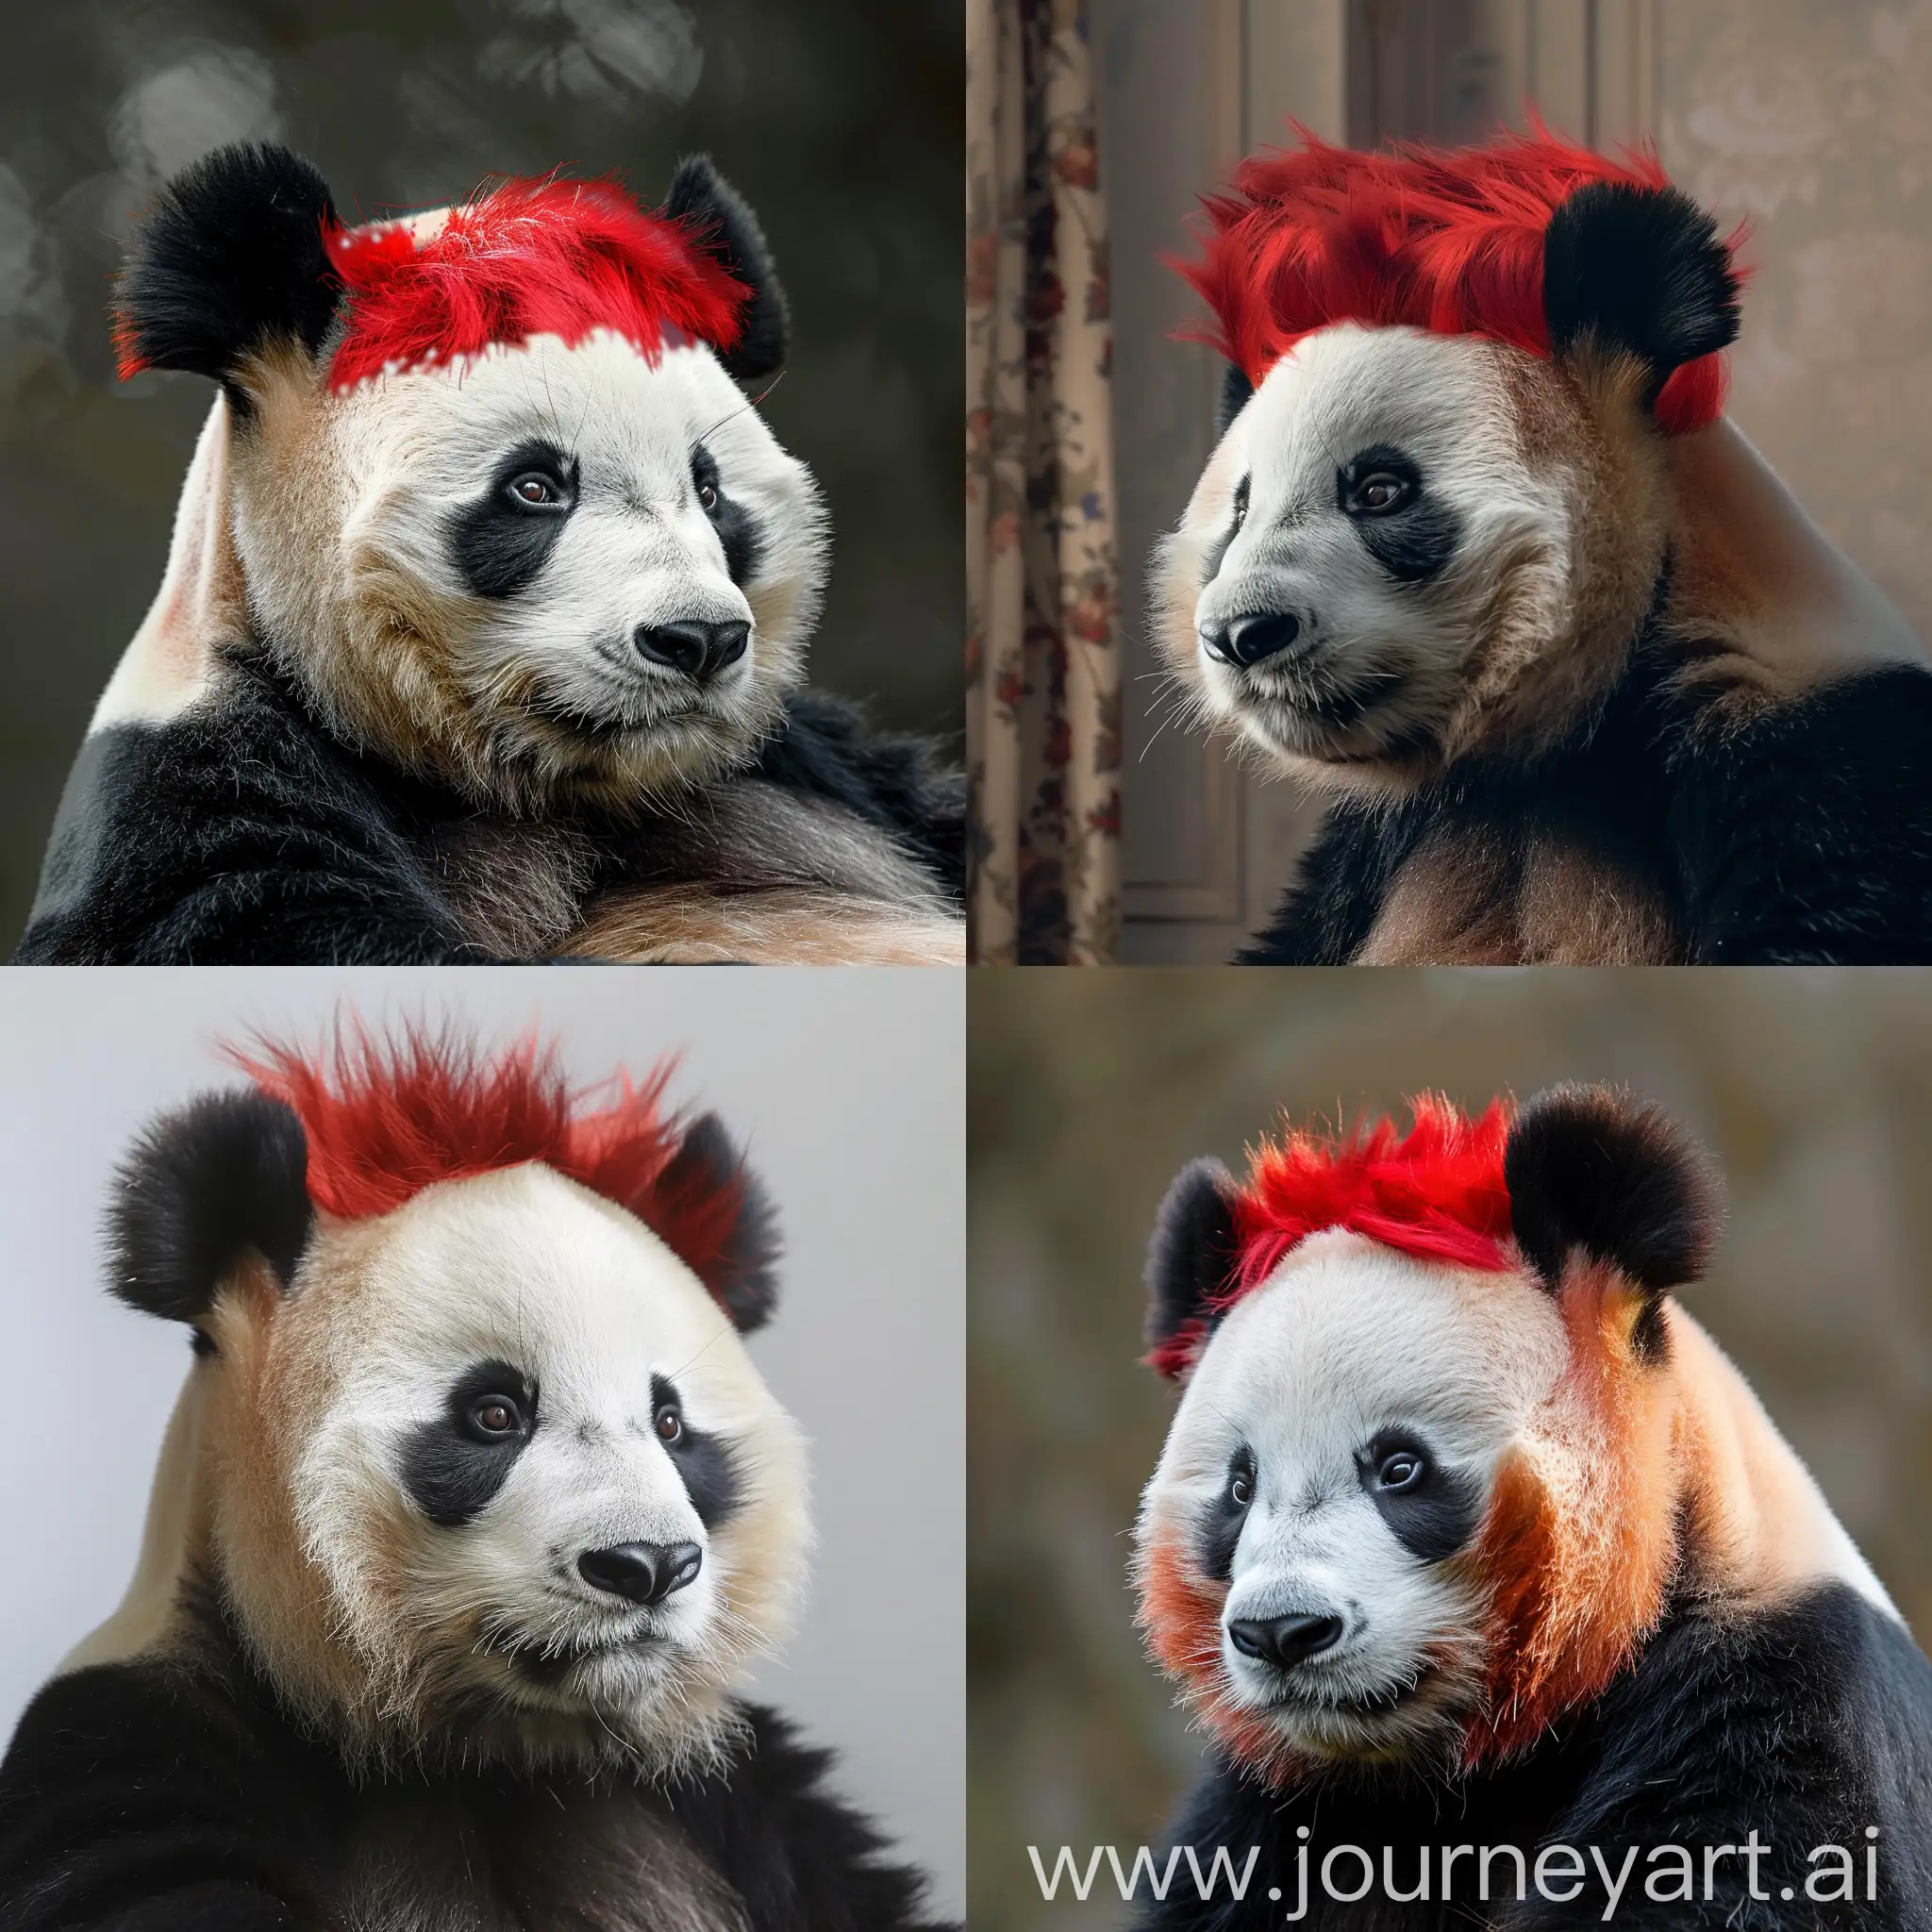 Adorable-RedHaired-Panda-Portrait